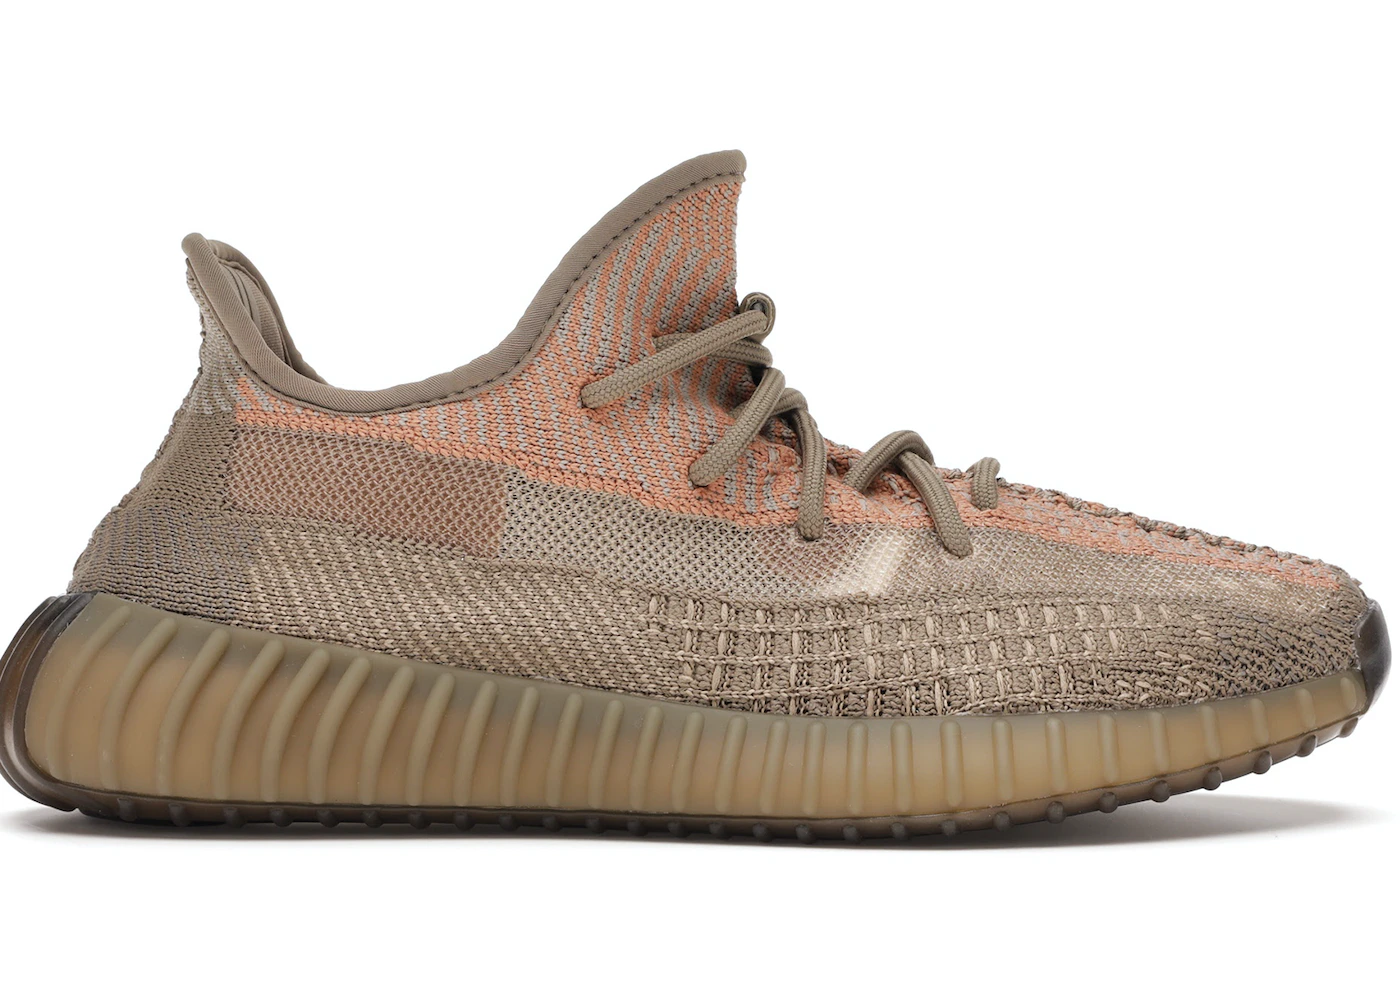 I agree Wafer Make clear adidas Yeezy Boost 350 V2 Sand Taupe - FZ5240 - US